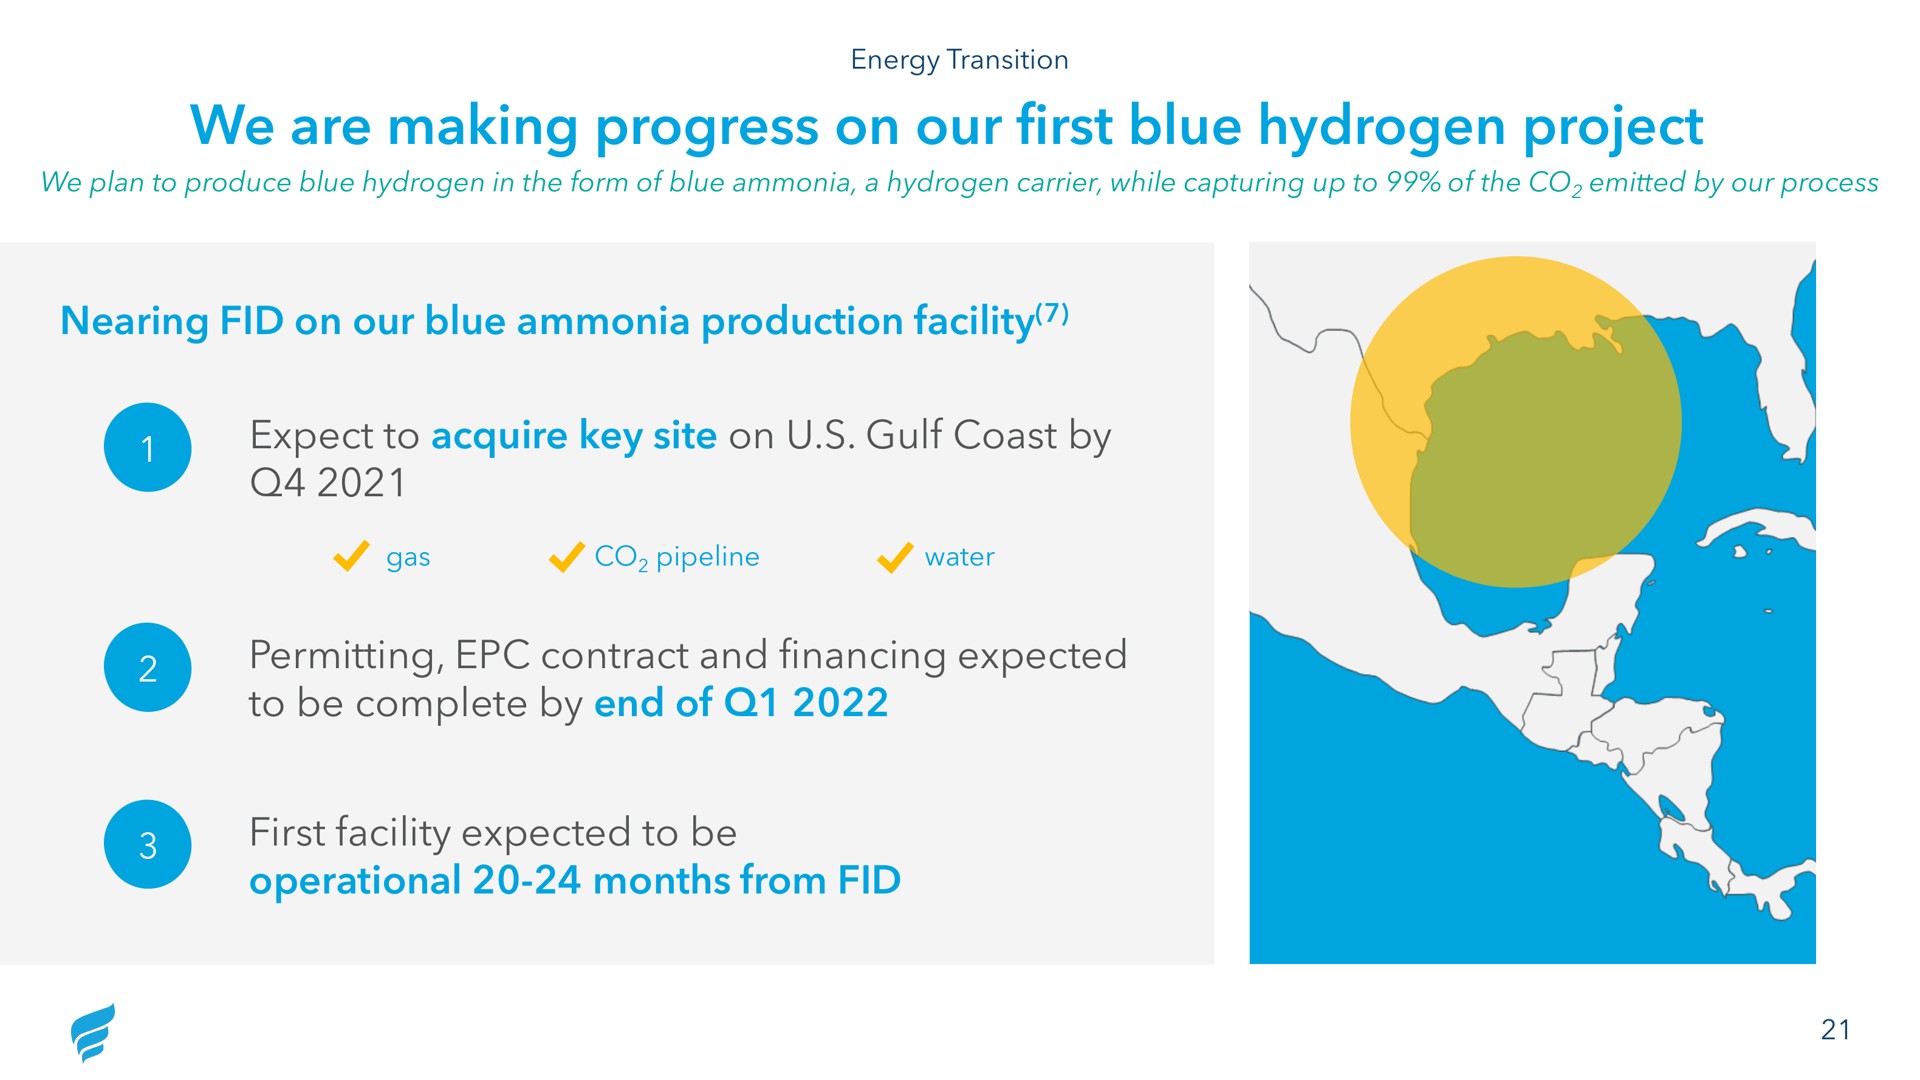 we are making progress on our first blue hydrogen project nearing fid on our blue ammonia production facility expect to acquire key site on gulf coast by permitting contract and financing expected to be complete by end of first facility expected to be operational months from fid a | NewFortress Energy